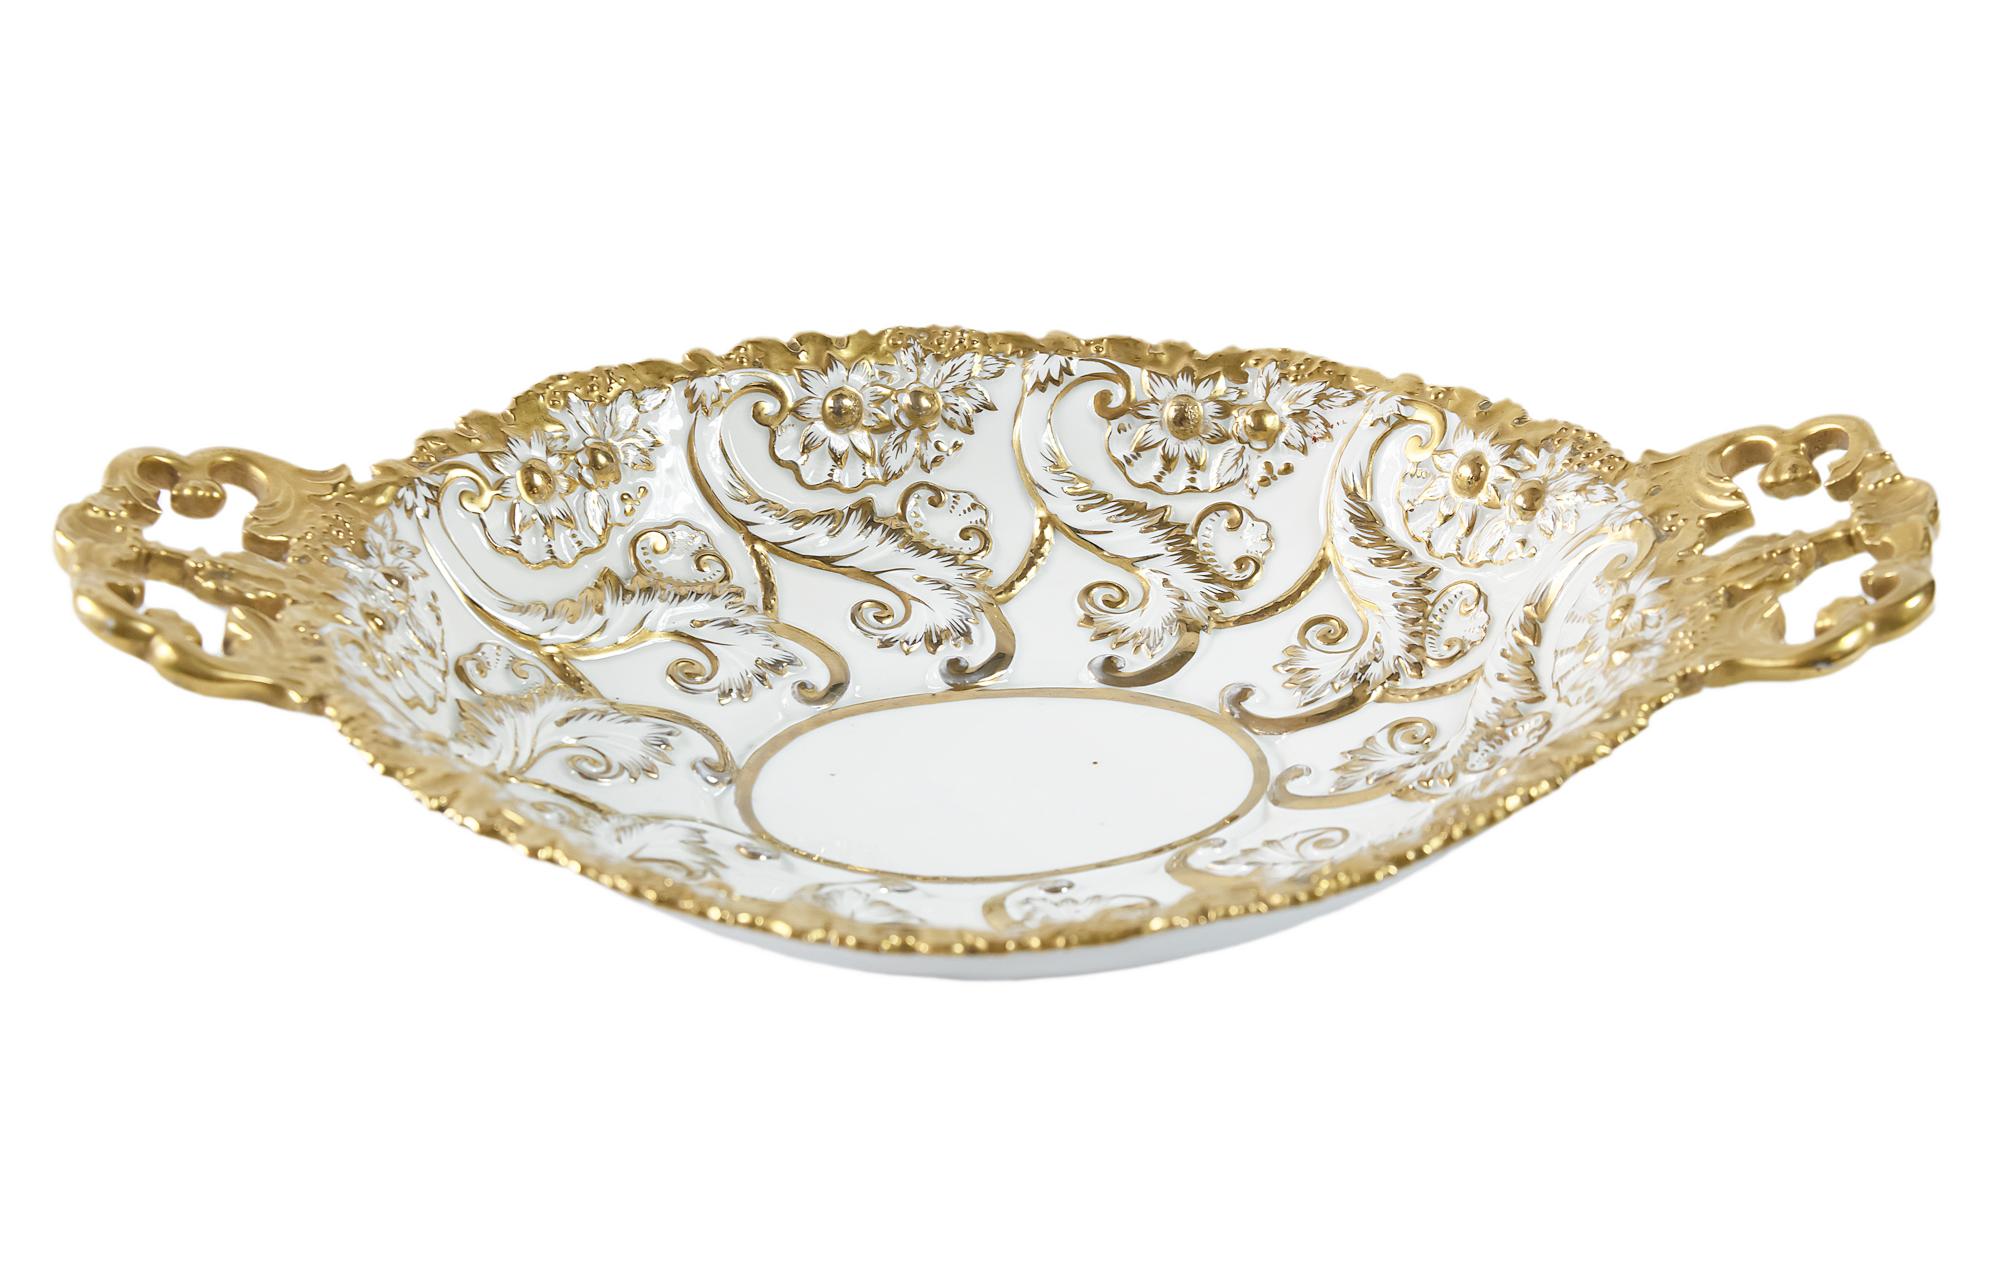 Meissen Porcelain plate/bowl with relief floral motives hand painted in gold.
Measurements: 39 x 25 x (H) 8 cm.